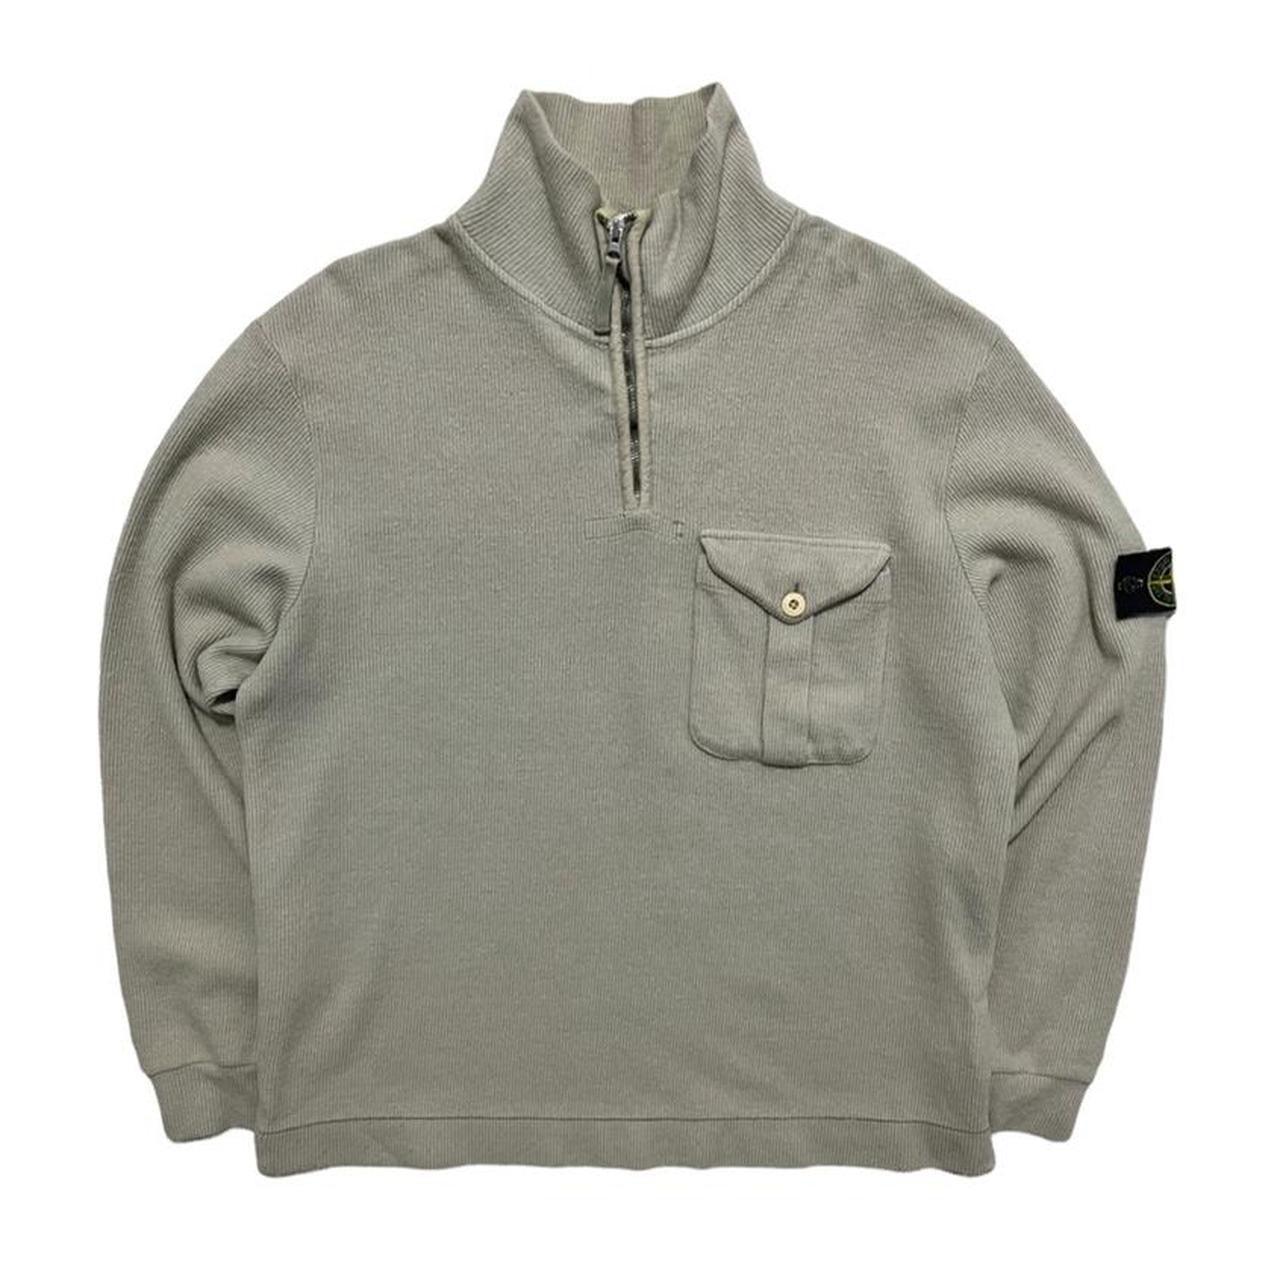 Stone Island A/W 2001 Ribbed Cotton Quarter Zip - Known Source